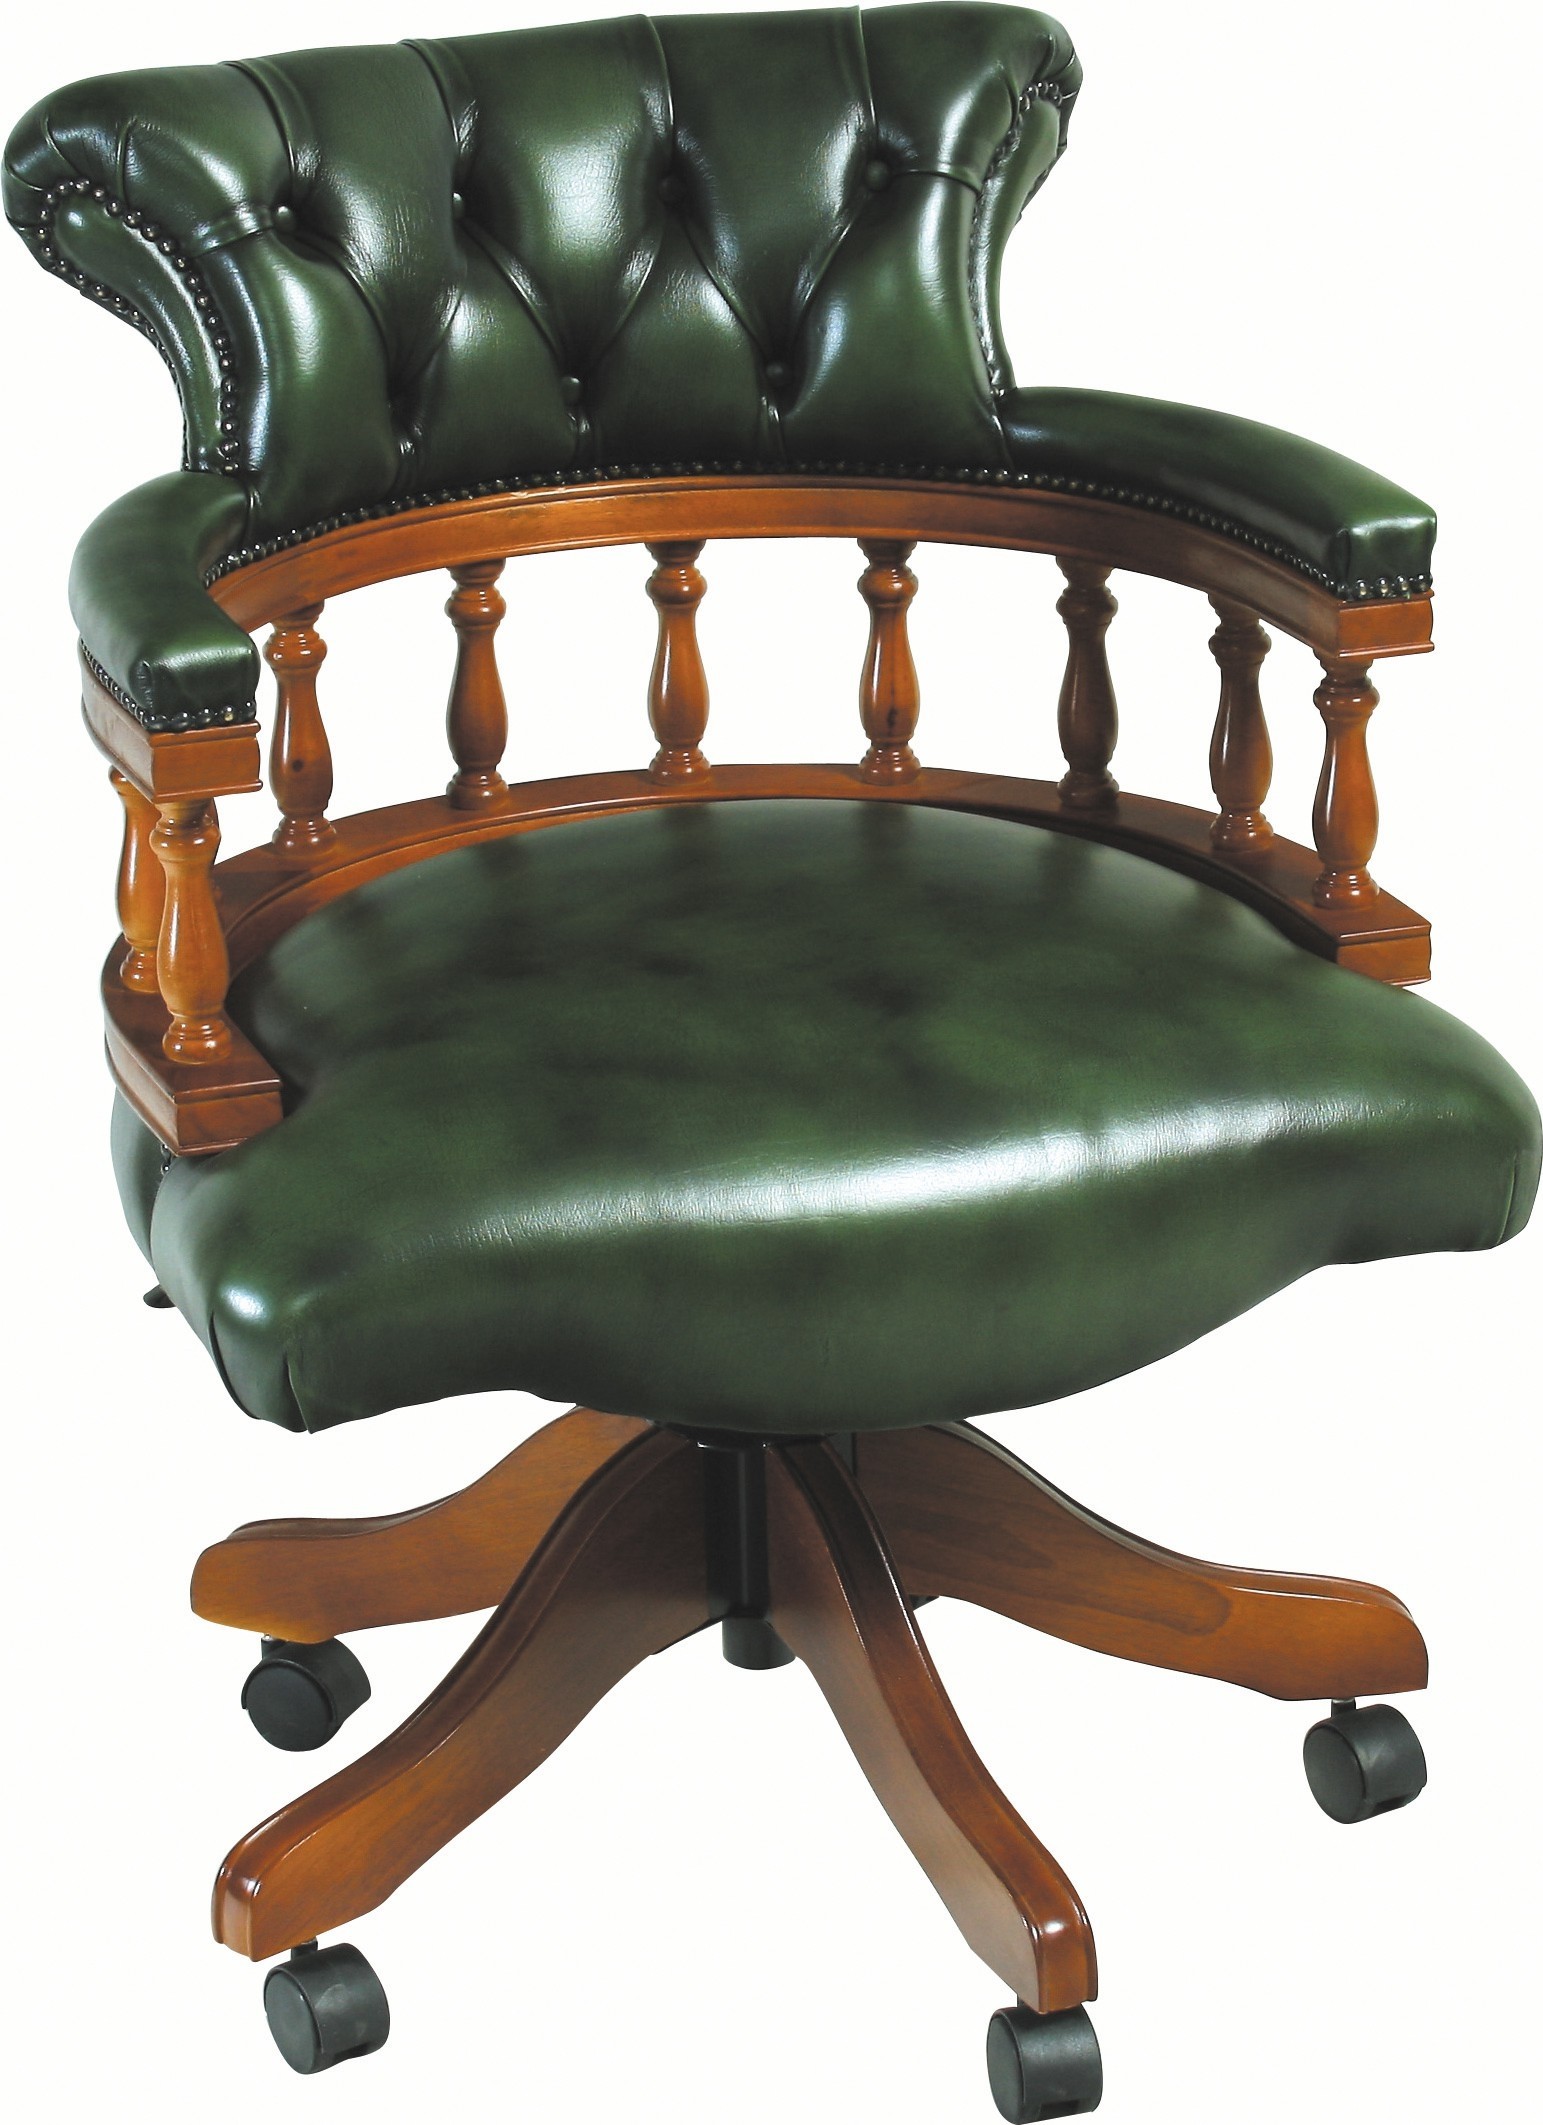 Captains chair leather chairs